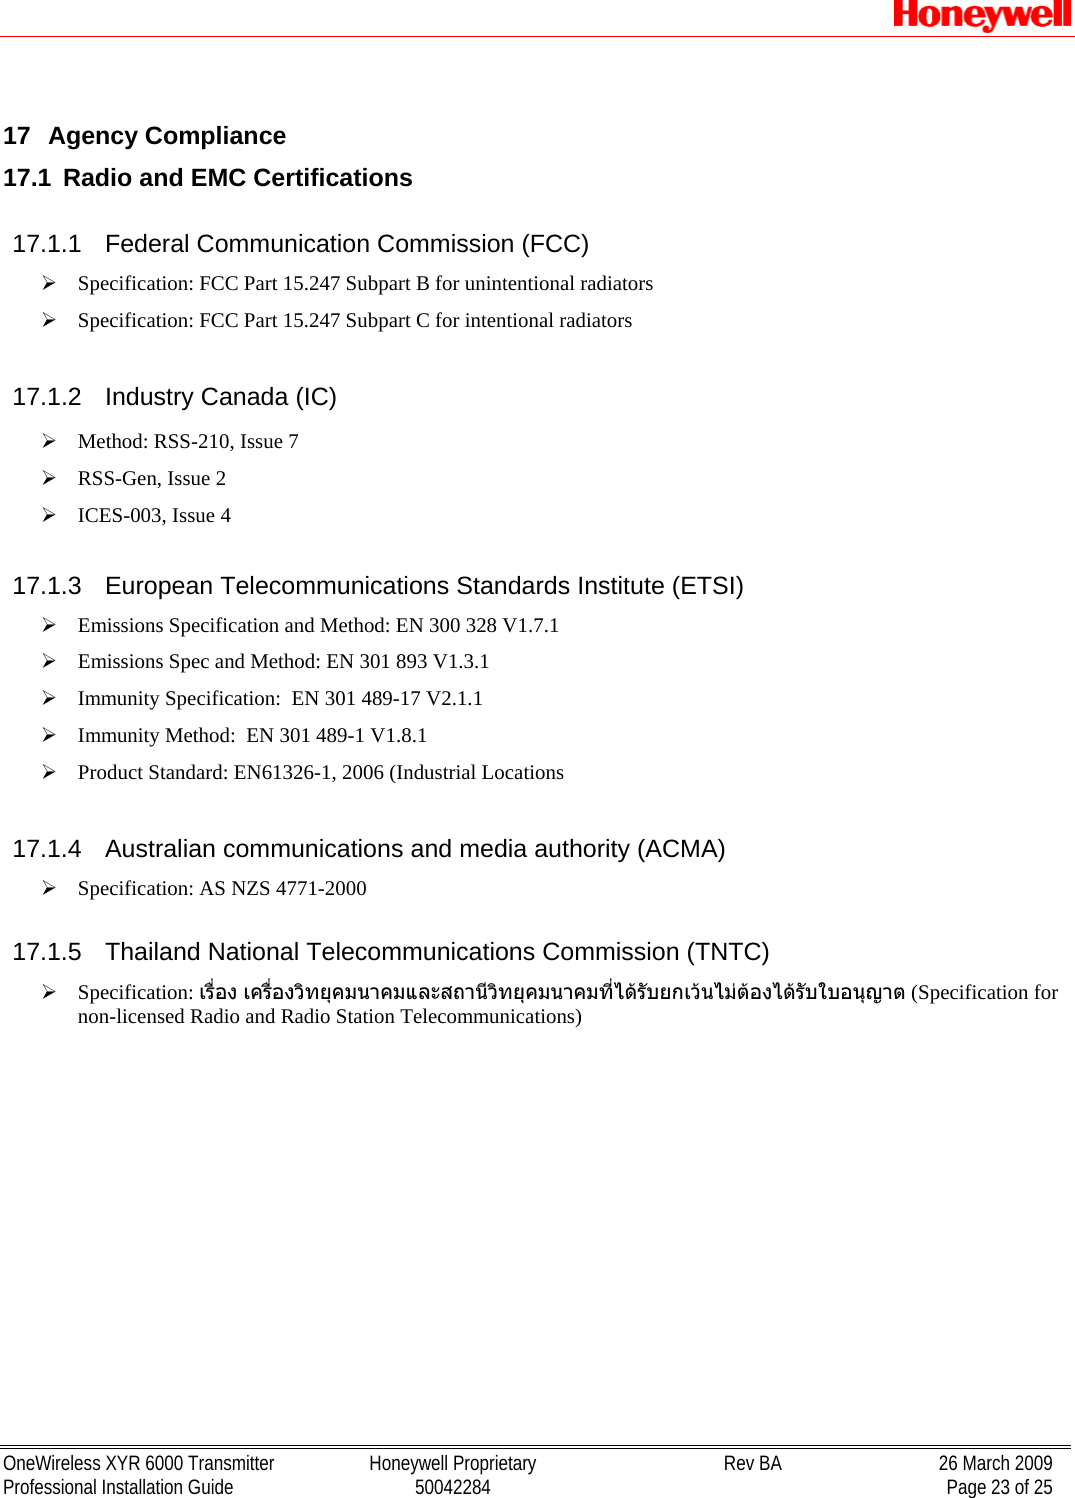   OneWireless XYR 6000 Transmitter  Honeywell Proprietary  Rev BA  26 March 2009 Professional Installation Guide  50042284    Page 23 of 25  17 Agency Compliance 17.1  Radio and EMC Certifications 17.1.1  Federal Communication Commission (FCC) ¾ Specification: FCC Part 15.247 Subpart B for unintentional radiators ¾ Specification: FCC Part 15.247 Subpart C for intentional radiators 17.1.2  Industry Canada (IC) ¾ Method: RSS-210, Issue 7 ¾ RSS-Gen, Issue 2 ¾ ICES-003, Issue 4 17.1.3 European Telecommunications Standards Institute (ETSI) ¾ Emissions Specification and Method: EN 300 328 V1.7.1 ¾ Emissions Spec and Method: EN 301 893 V1.3.1 ¾ Immunity Specification:  EN 301 489-17 V2.1.1 ¾ Immunity Method:  EN 301 489-1 V1.8.1 ¾ Product Standard: EN61326-1, 2006 (Industrial Locations 17.1.4 Australian communications and media authority (ACMA) ¾ Specification: AS NZS 4771-2000  17.1.5  Thailand National Telecommunications Commission (TNTC) ¾ Specification: เรื่อง เครื่องวิทยุคมนาคมและสถานีวิทยุคมนาคมที่ไดรับยกเวนไมตองไดรับใบอนุญาต (Specification for non-licensed Radio and Radio Station Telecommunications) 